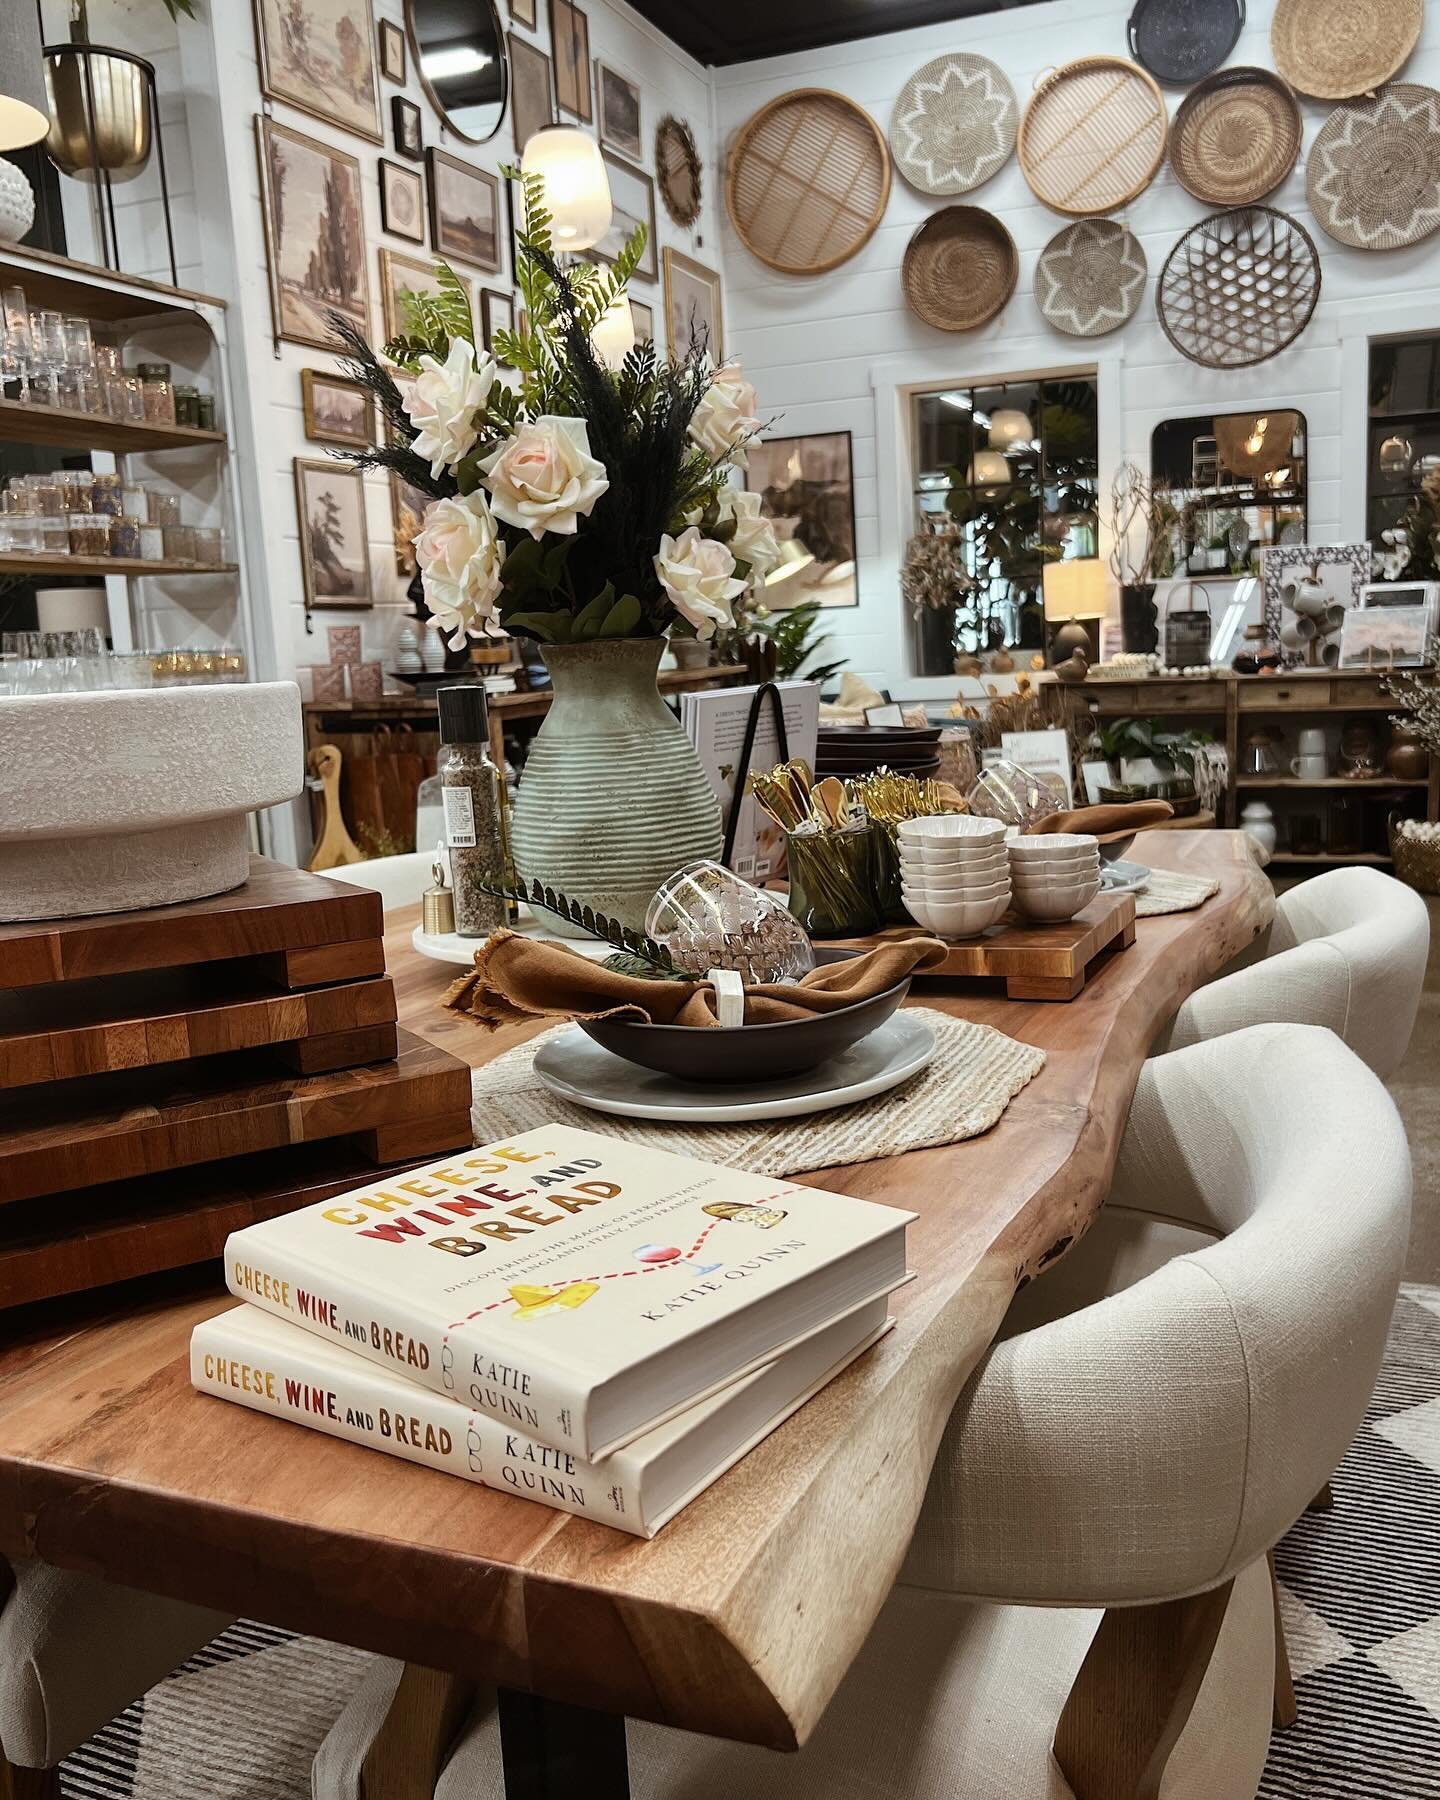 Set the table with flair ✨ 

With a little creativity and charming details, your time at the table will become a delightful occasion worth savoring. 🍽️

Did you see our post about our Memorial Day Weekend Sale? On Saturday May 25, we&rsquo;re offeri